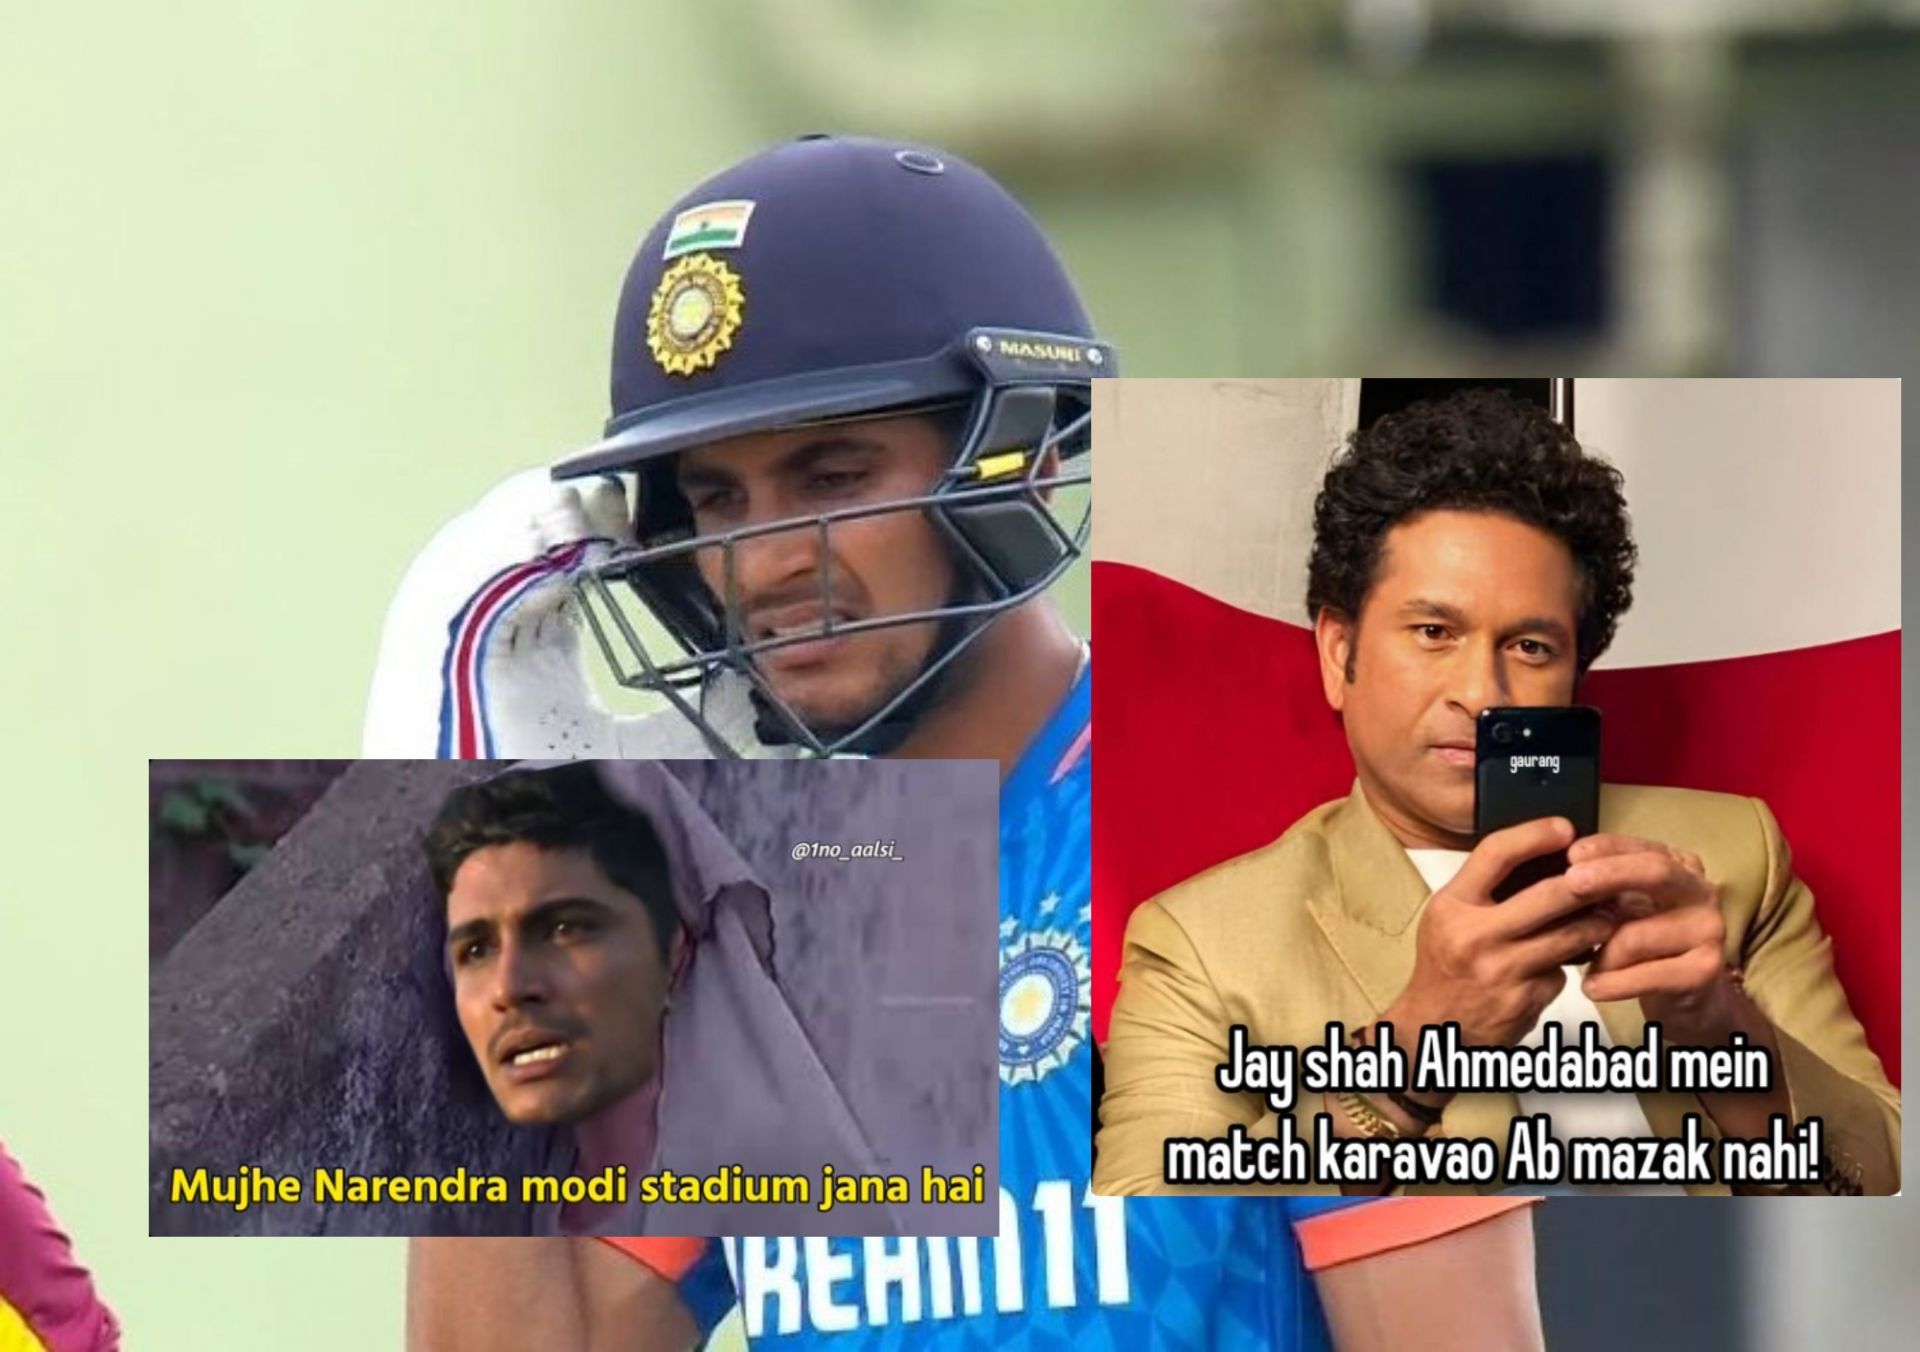 Fans troll Shubman Gill for batting failure in 3rd T20I vs West Indies.